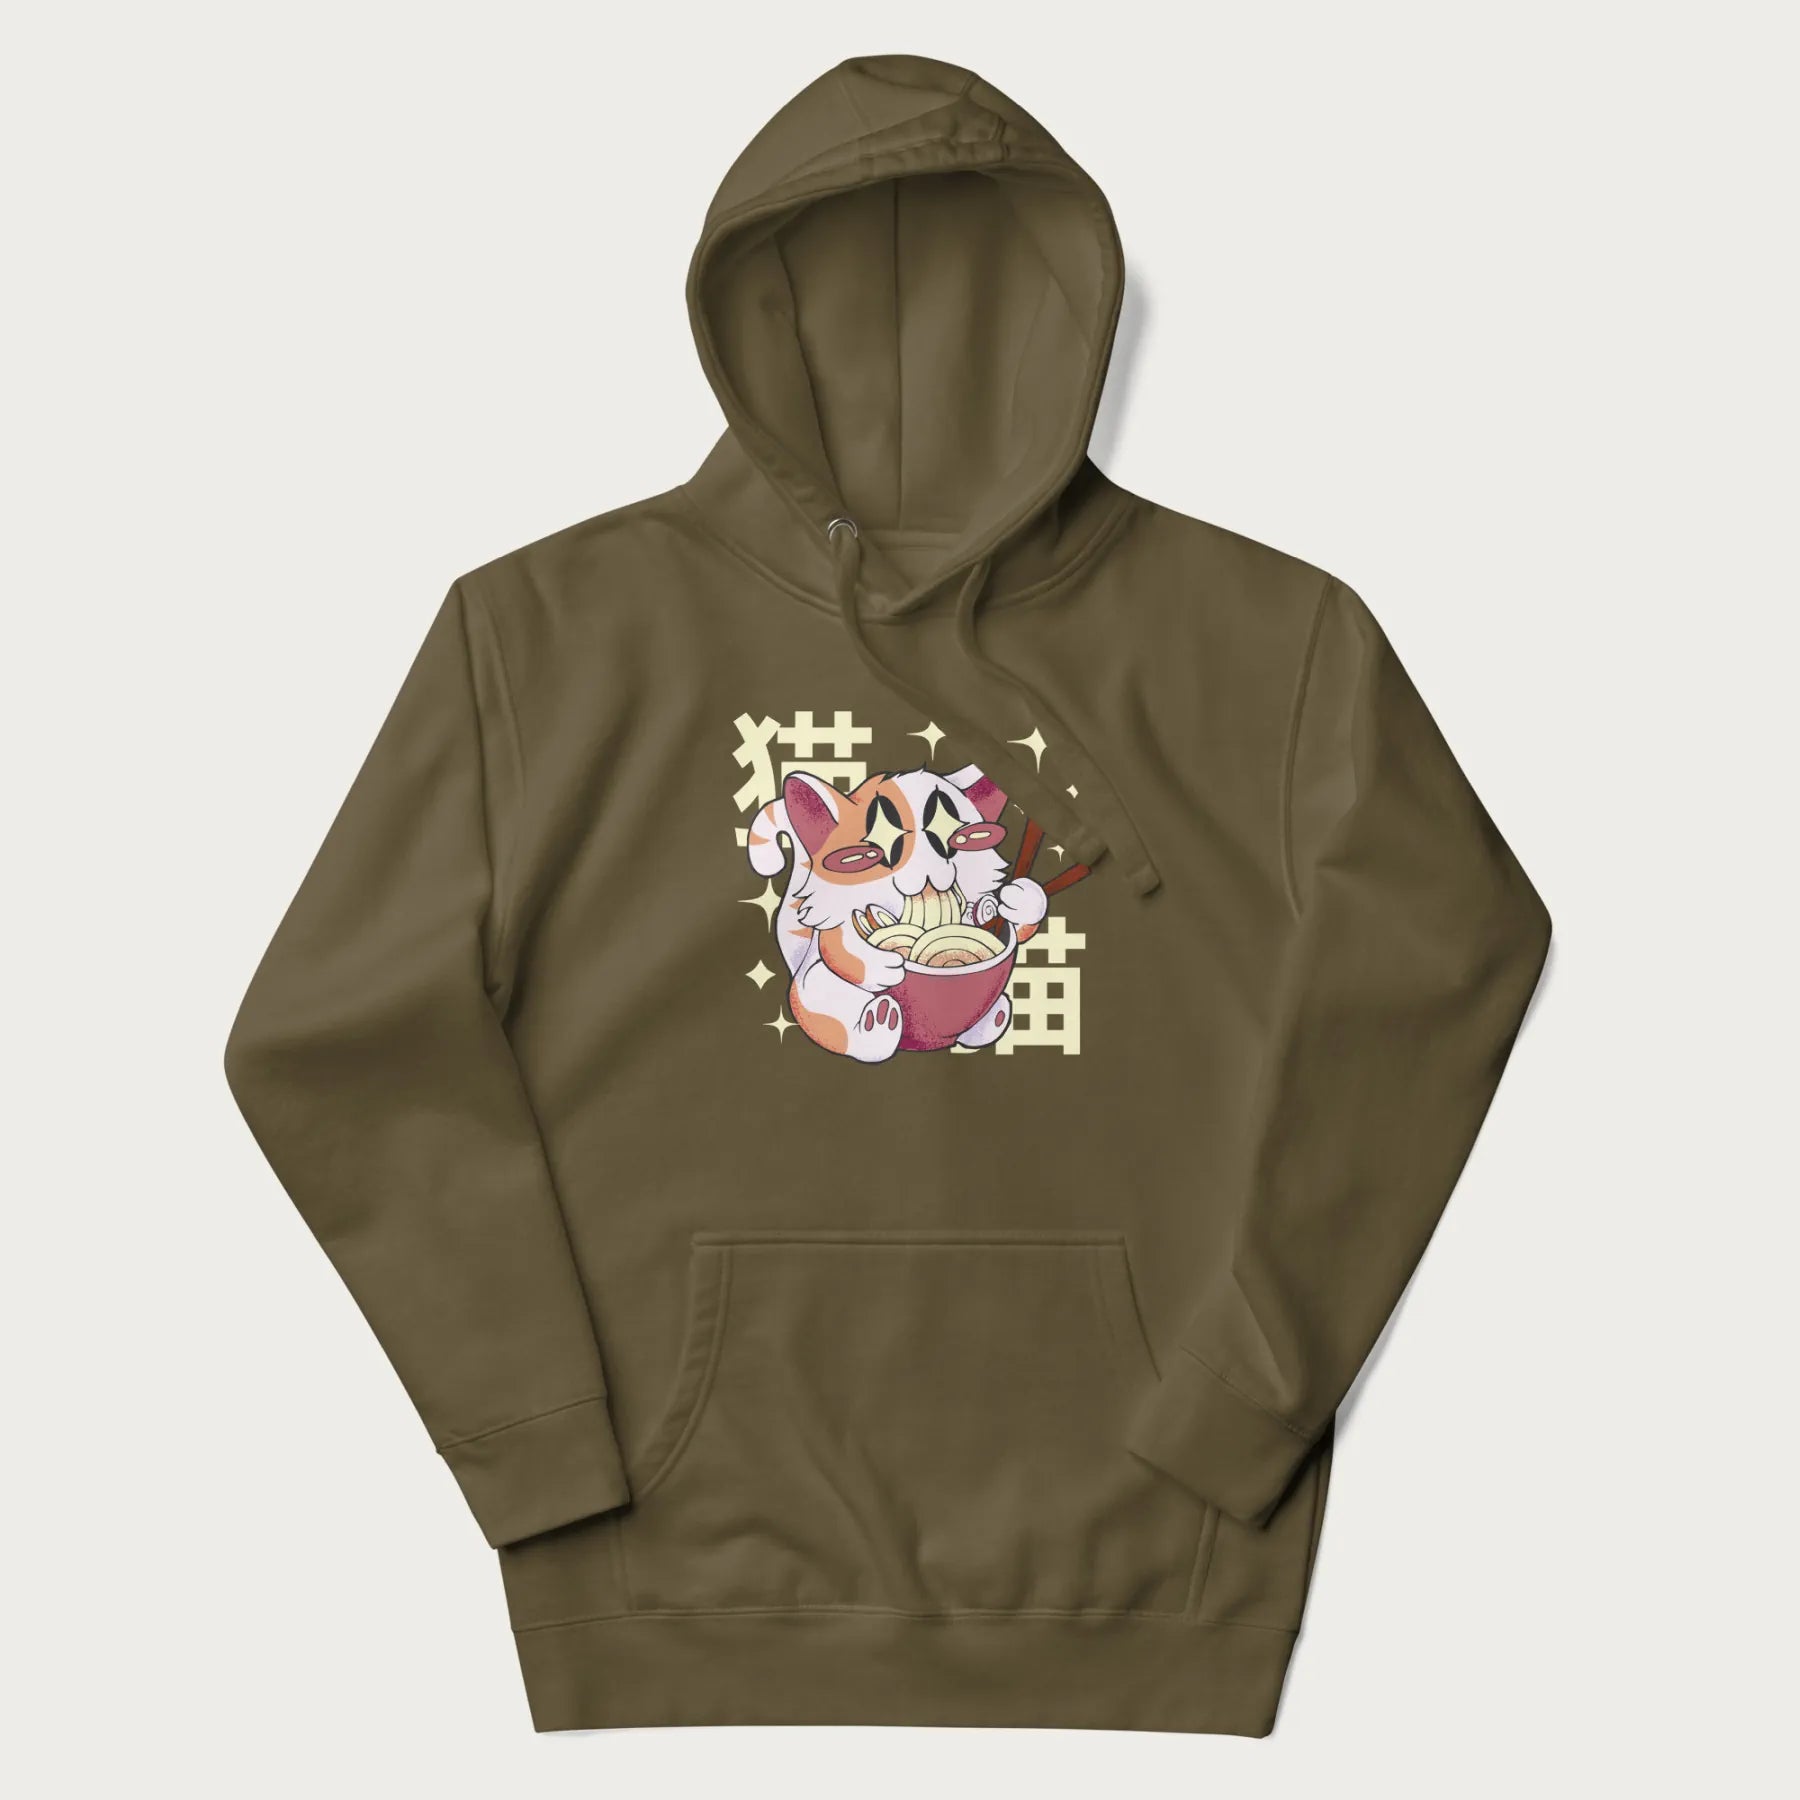 Military green hoodie with Japanese graphic of a cat eating ramen with Japanese text '猫' in the background.